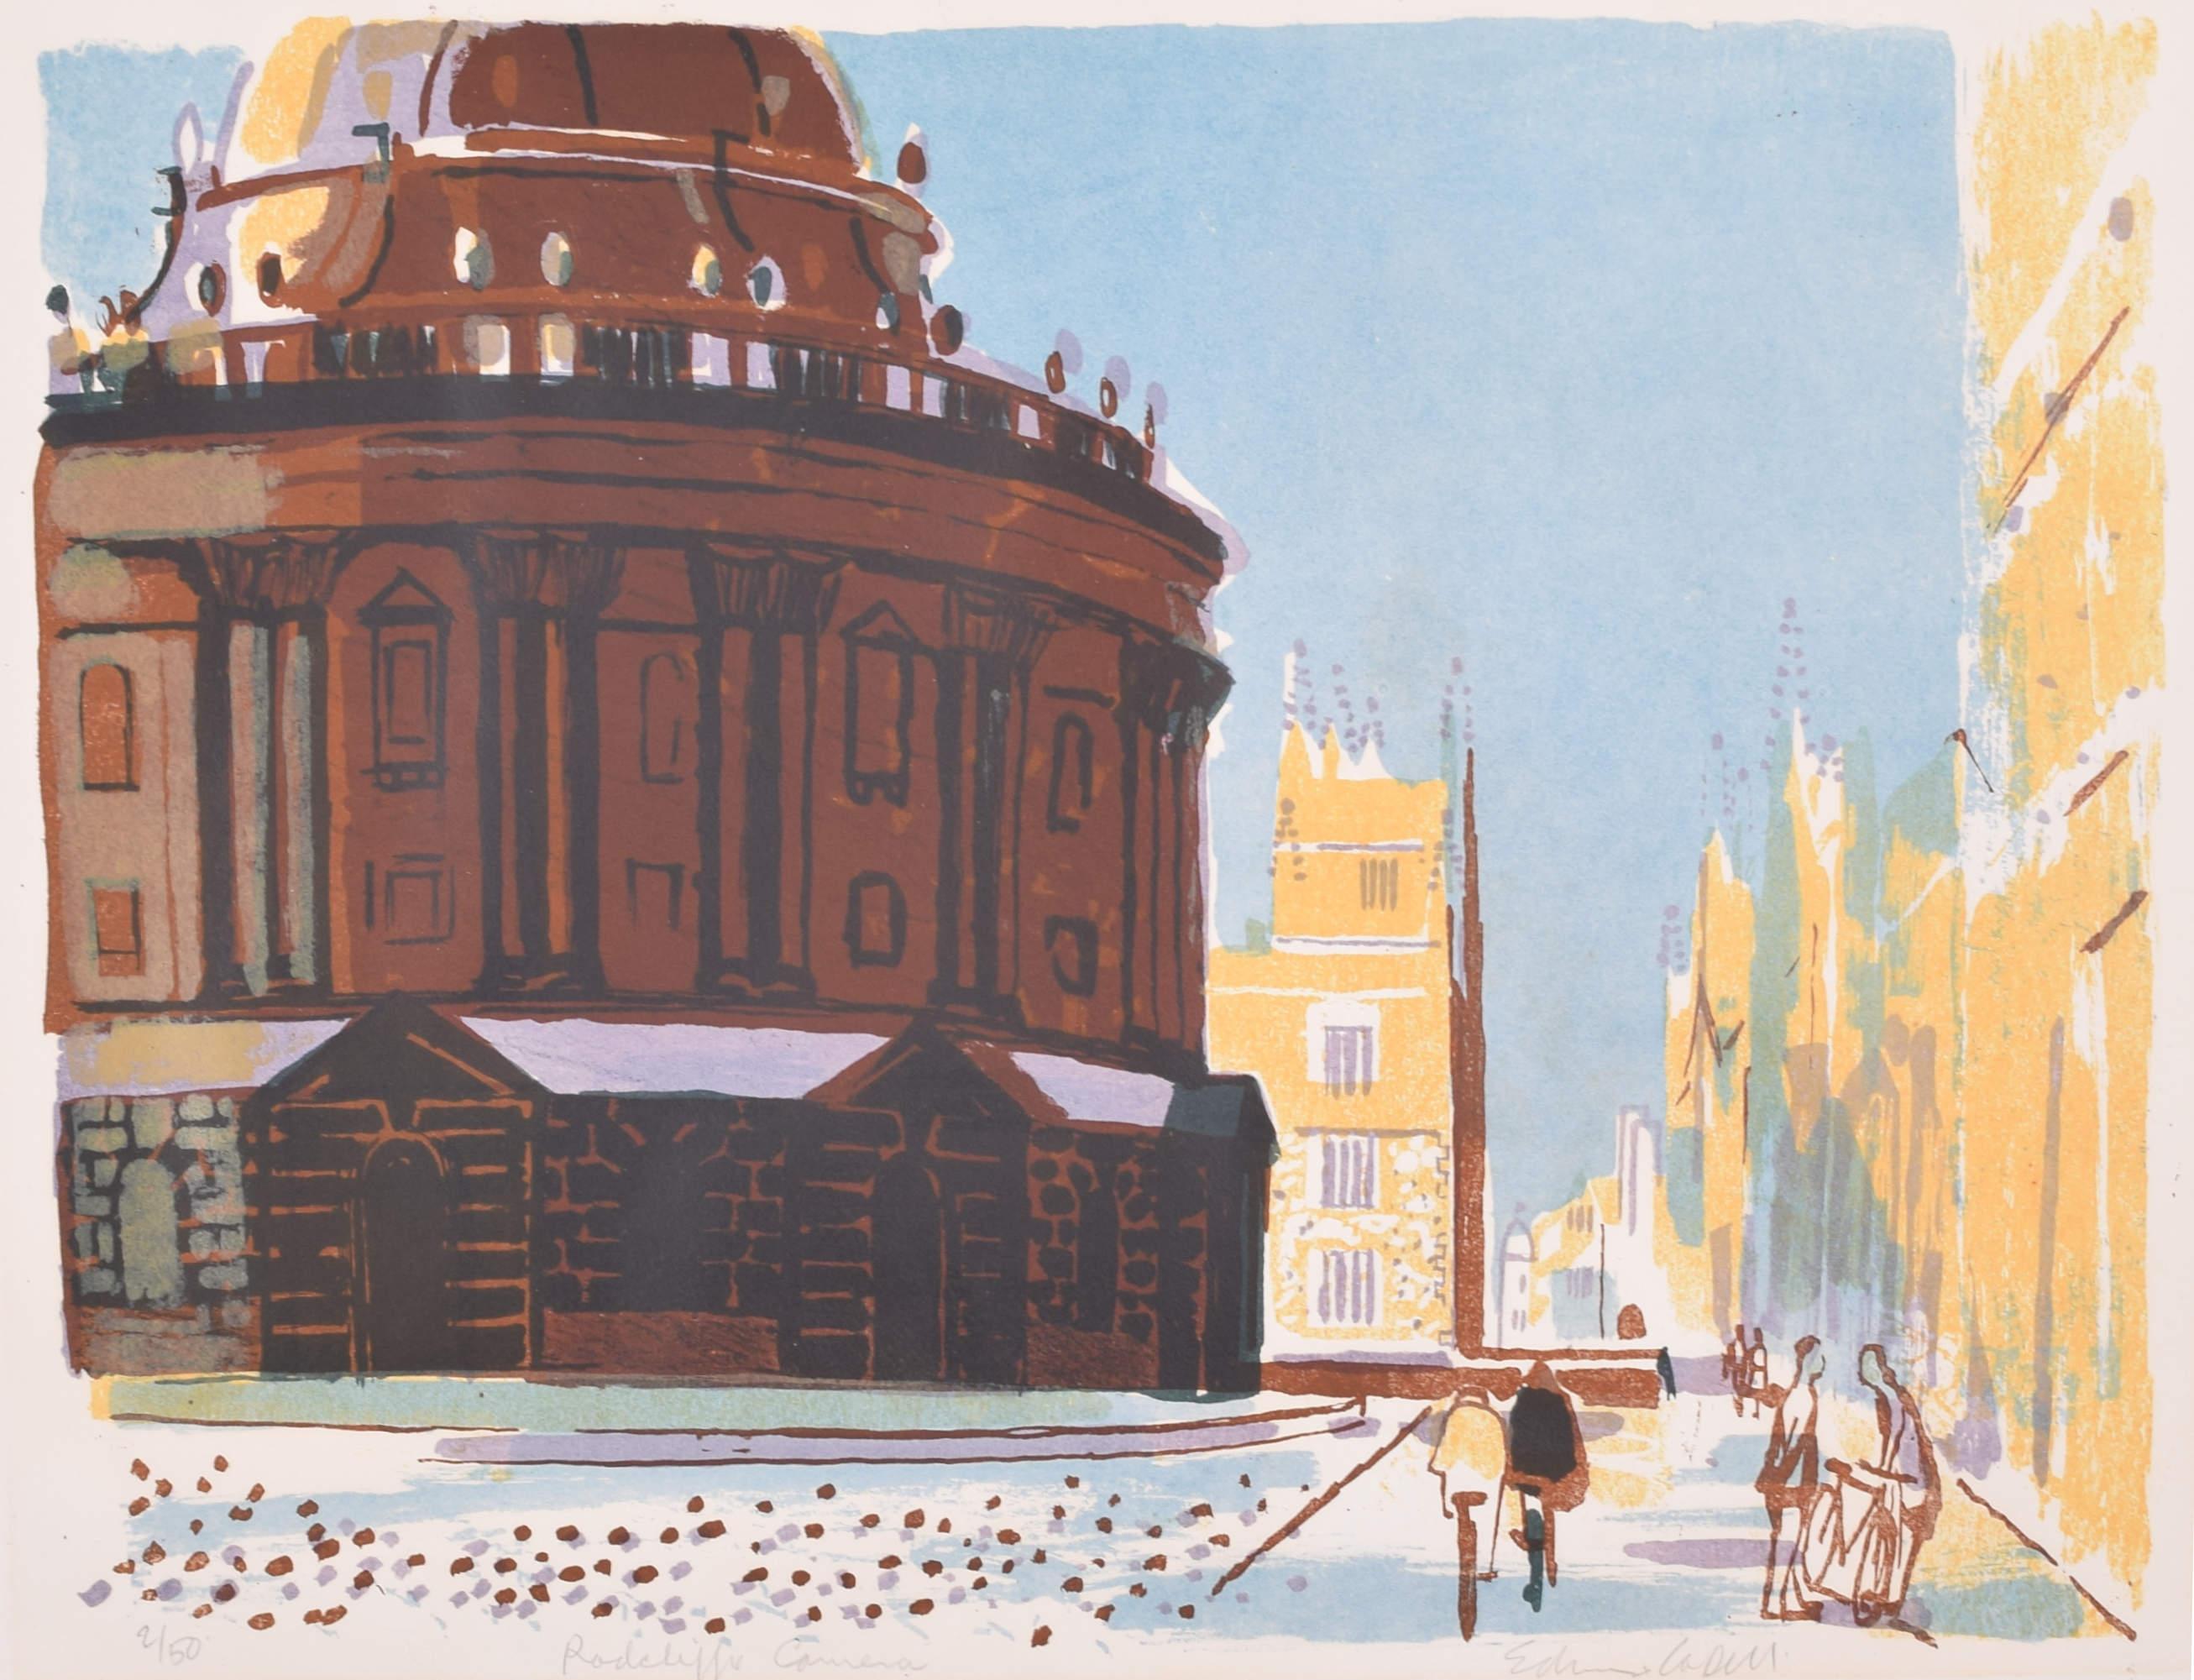 To see our other views of Oxford and Cambridge, or our other Modern British Art, scroll down to "More from this Seller" and below it click on "See all from this Seller" - or send us a message if you cannot find the view you want.

Edwin La Dell